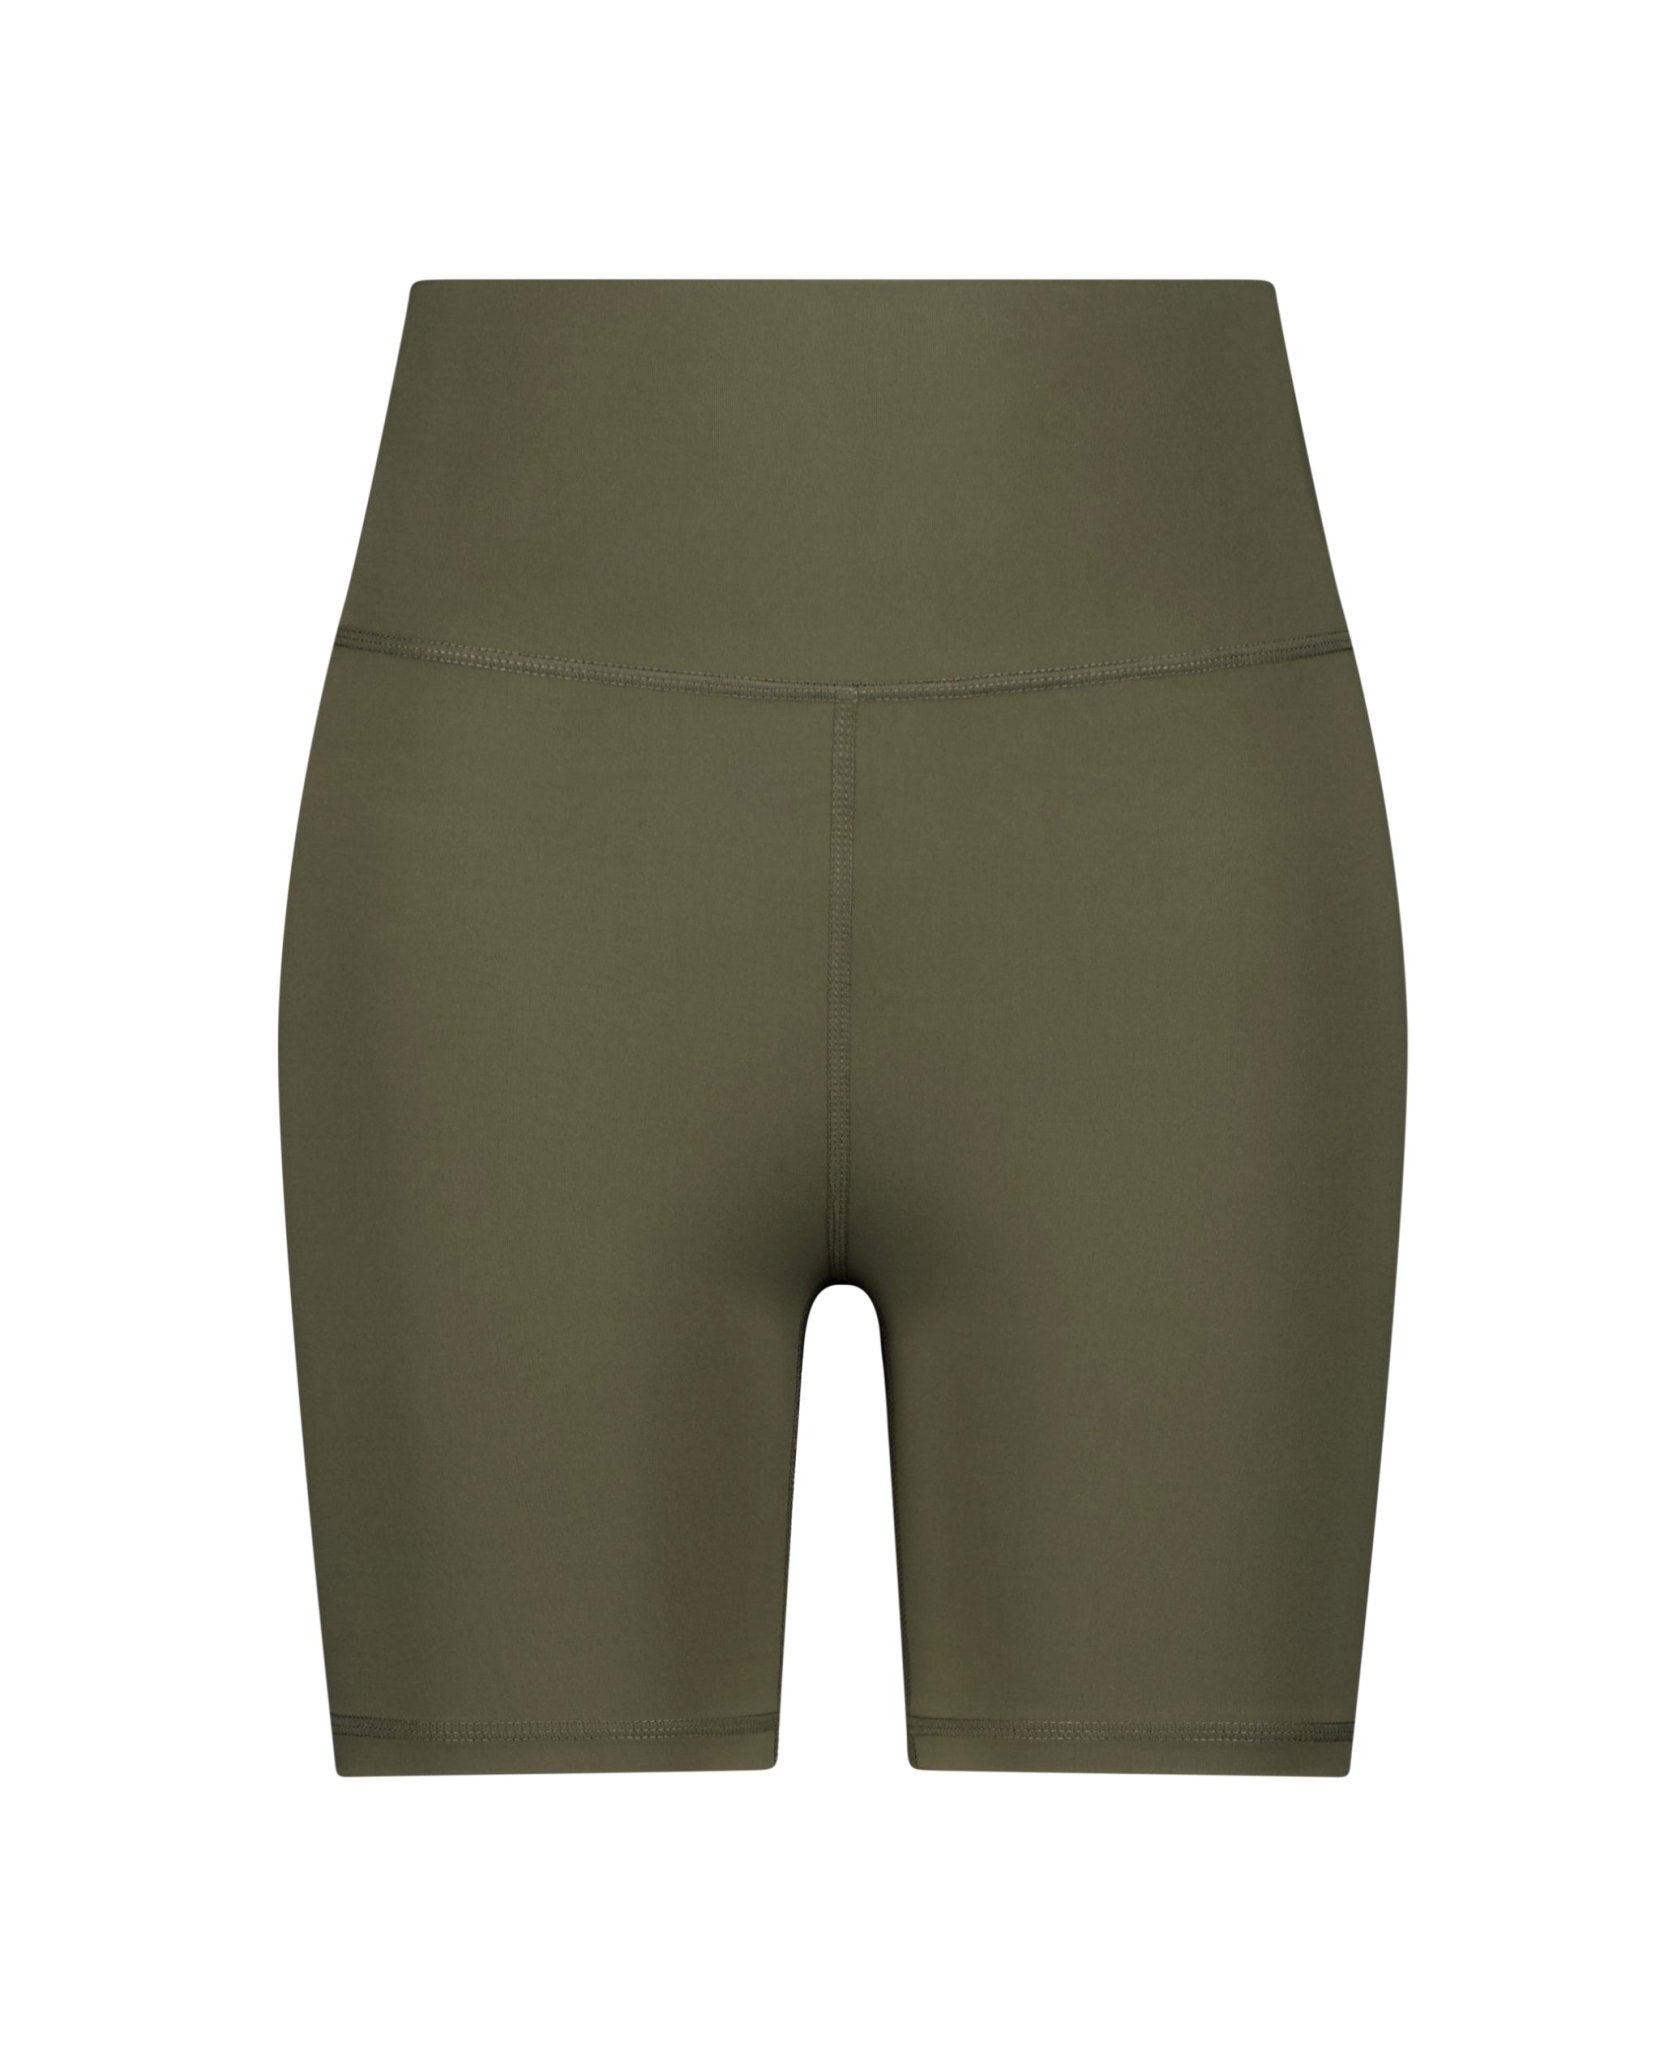 Olive Bike Shorts - Remmie By Riley